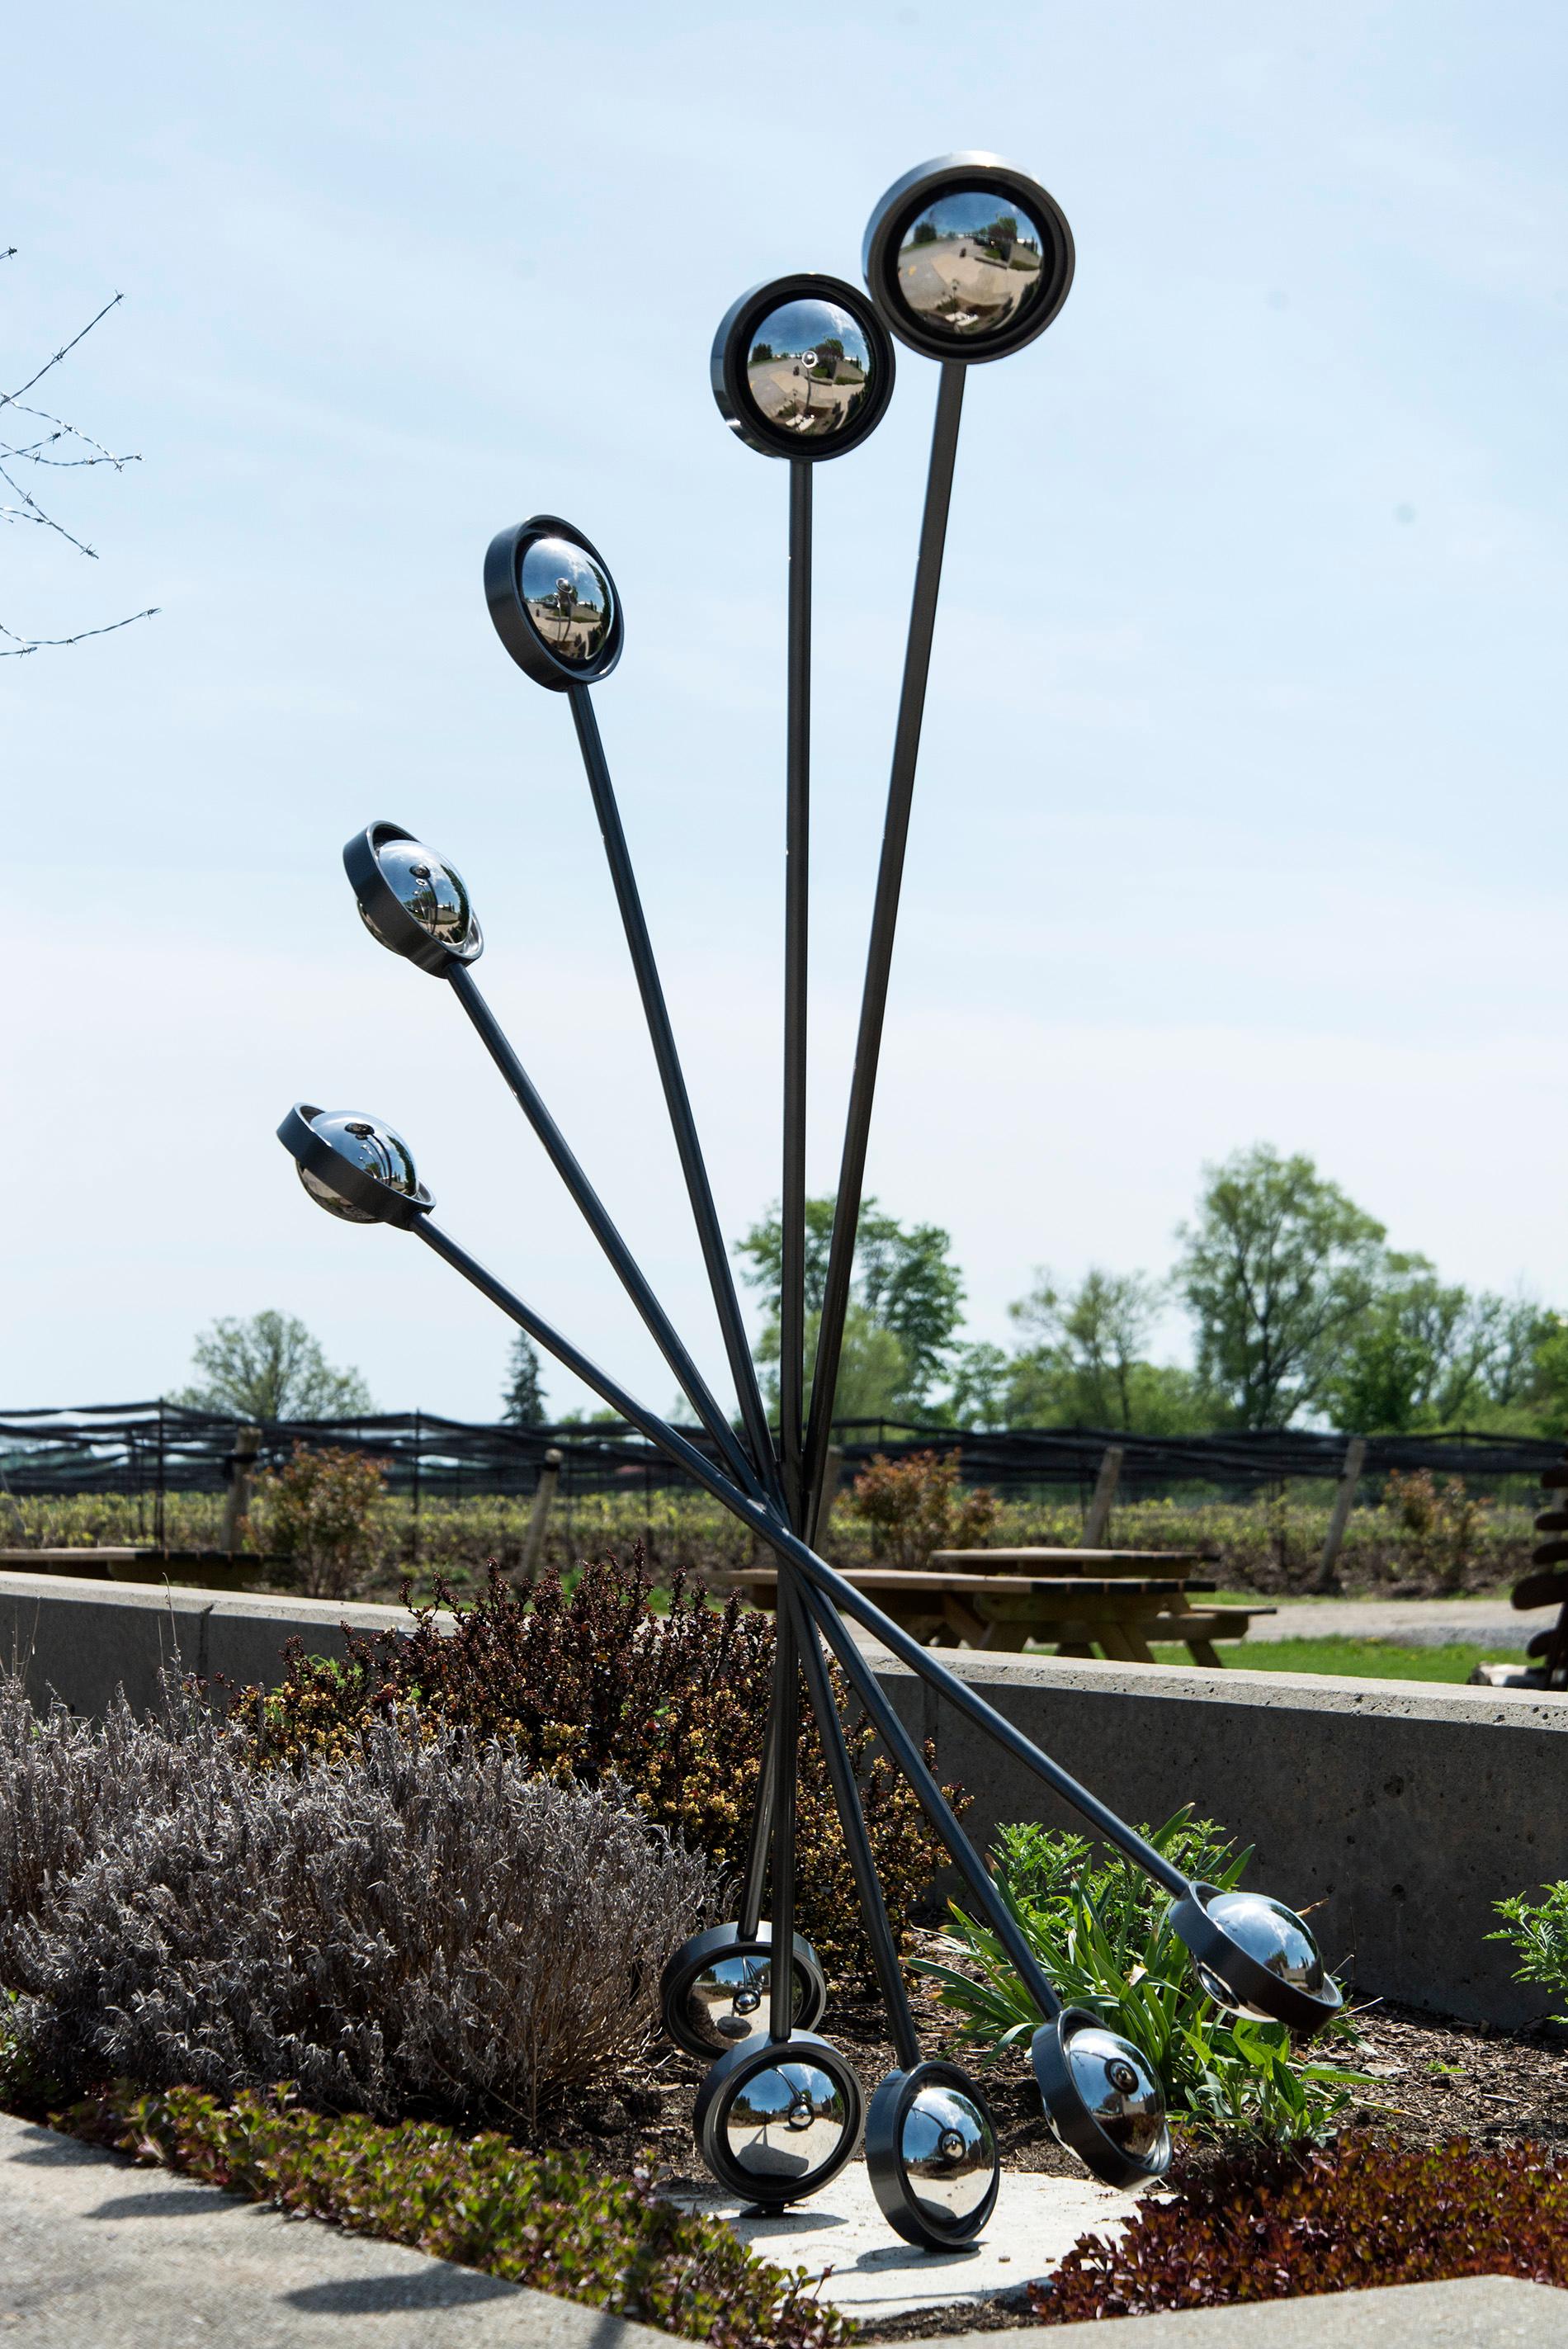 Action - tall, dynamic, reflective, geometric, abstract, steel outdoor sculpture - Abstract Sculpture by Ryan Van Der Hout